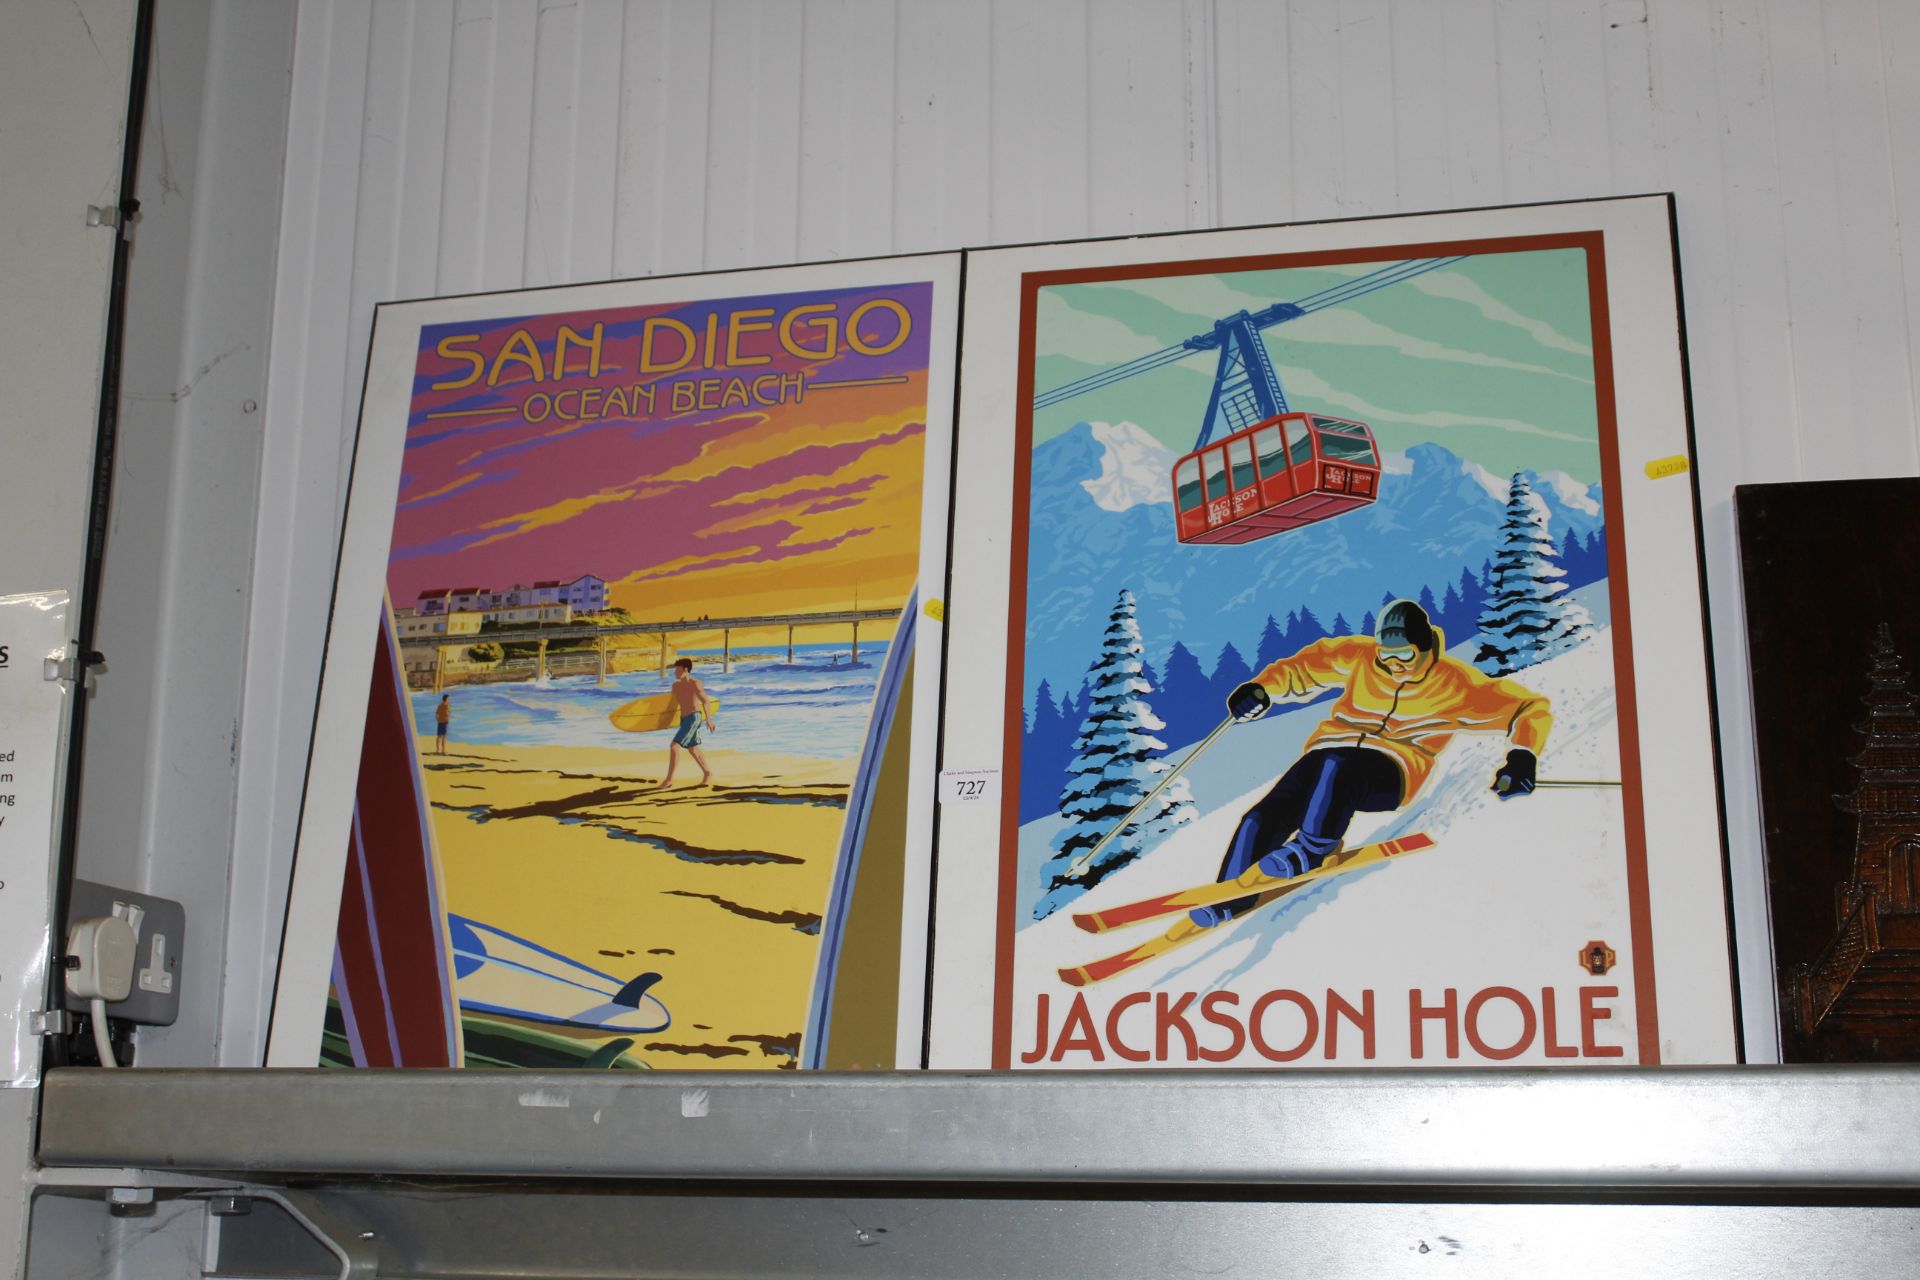 Two advertising posters for 'Jacksons Hole' and 'S